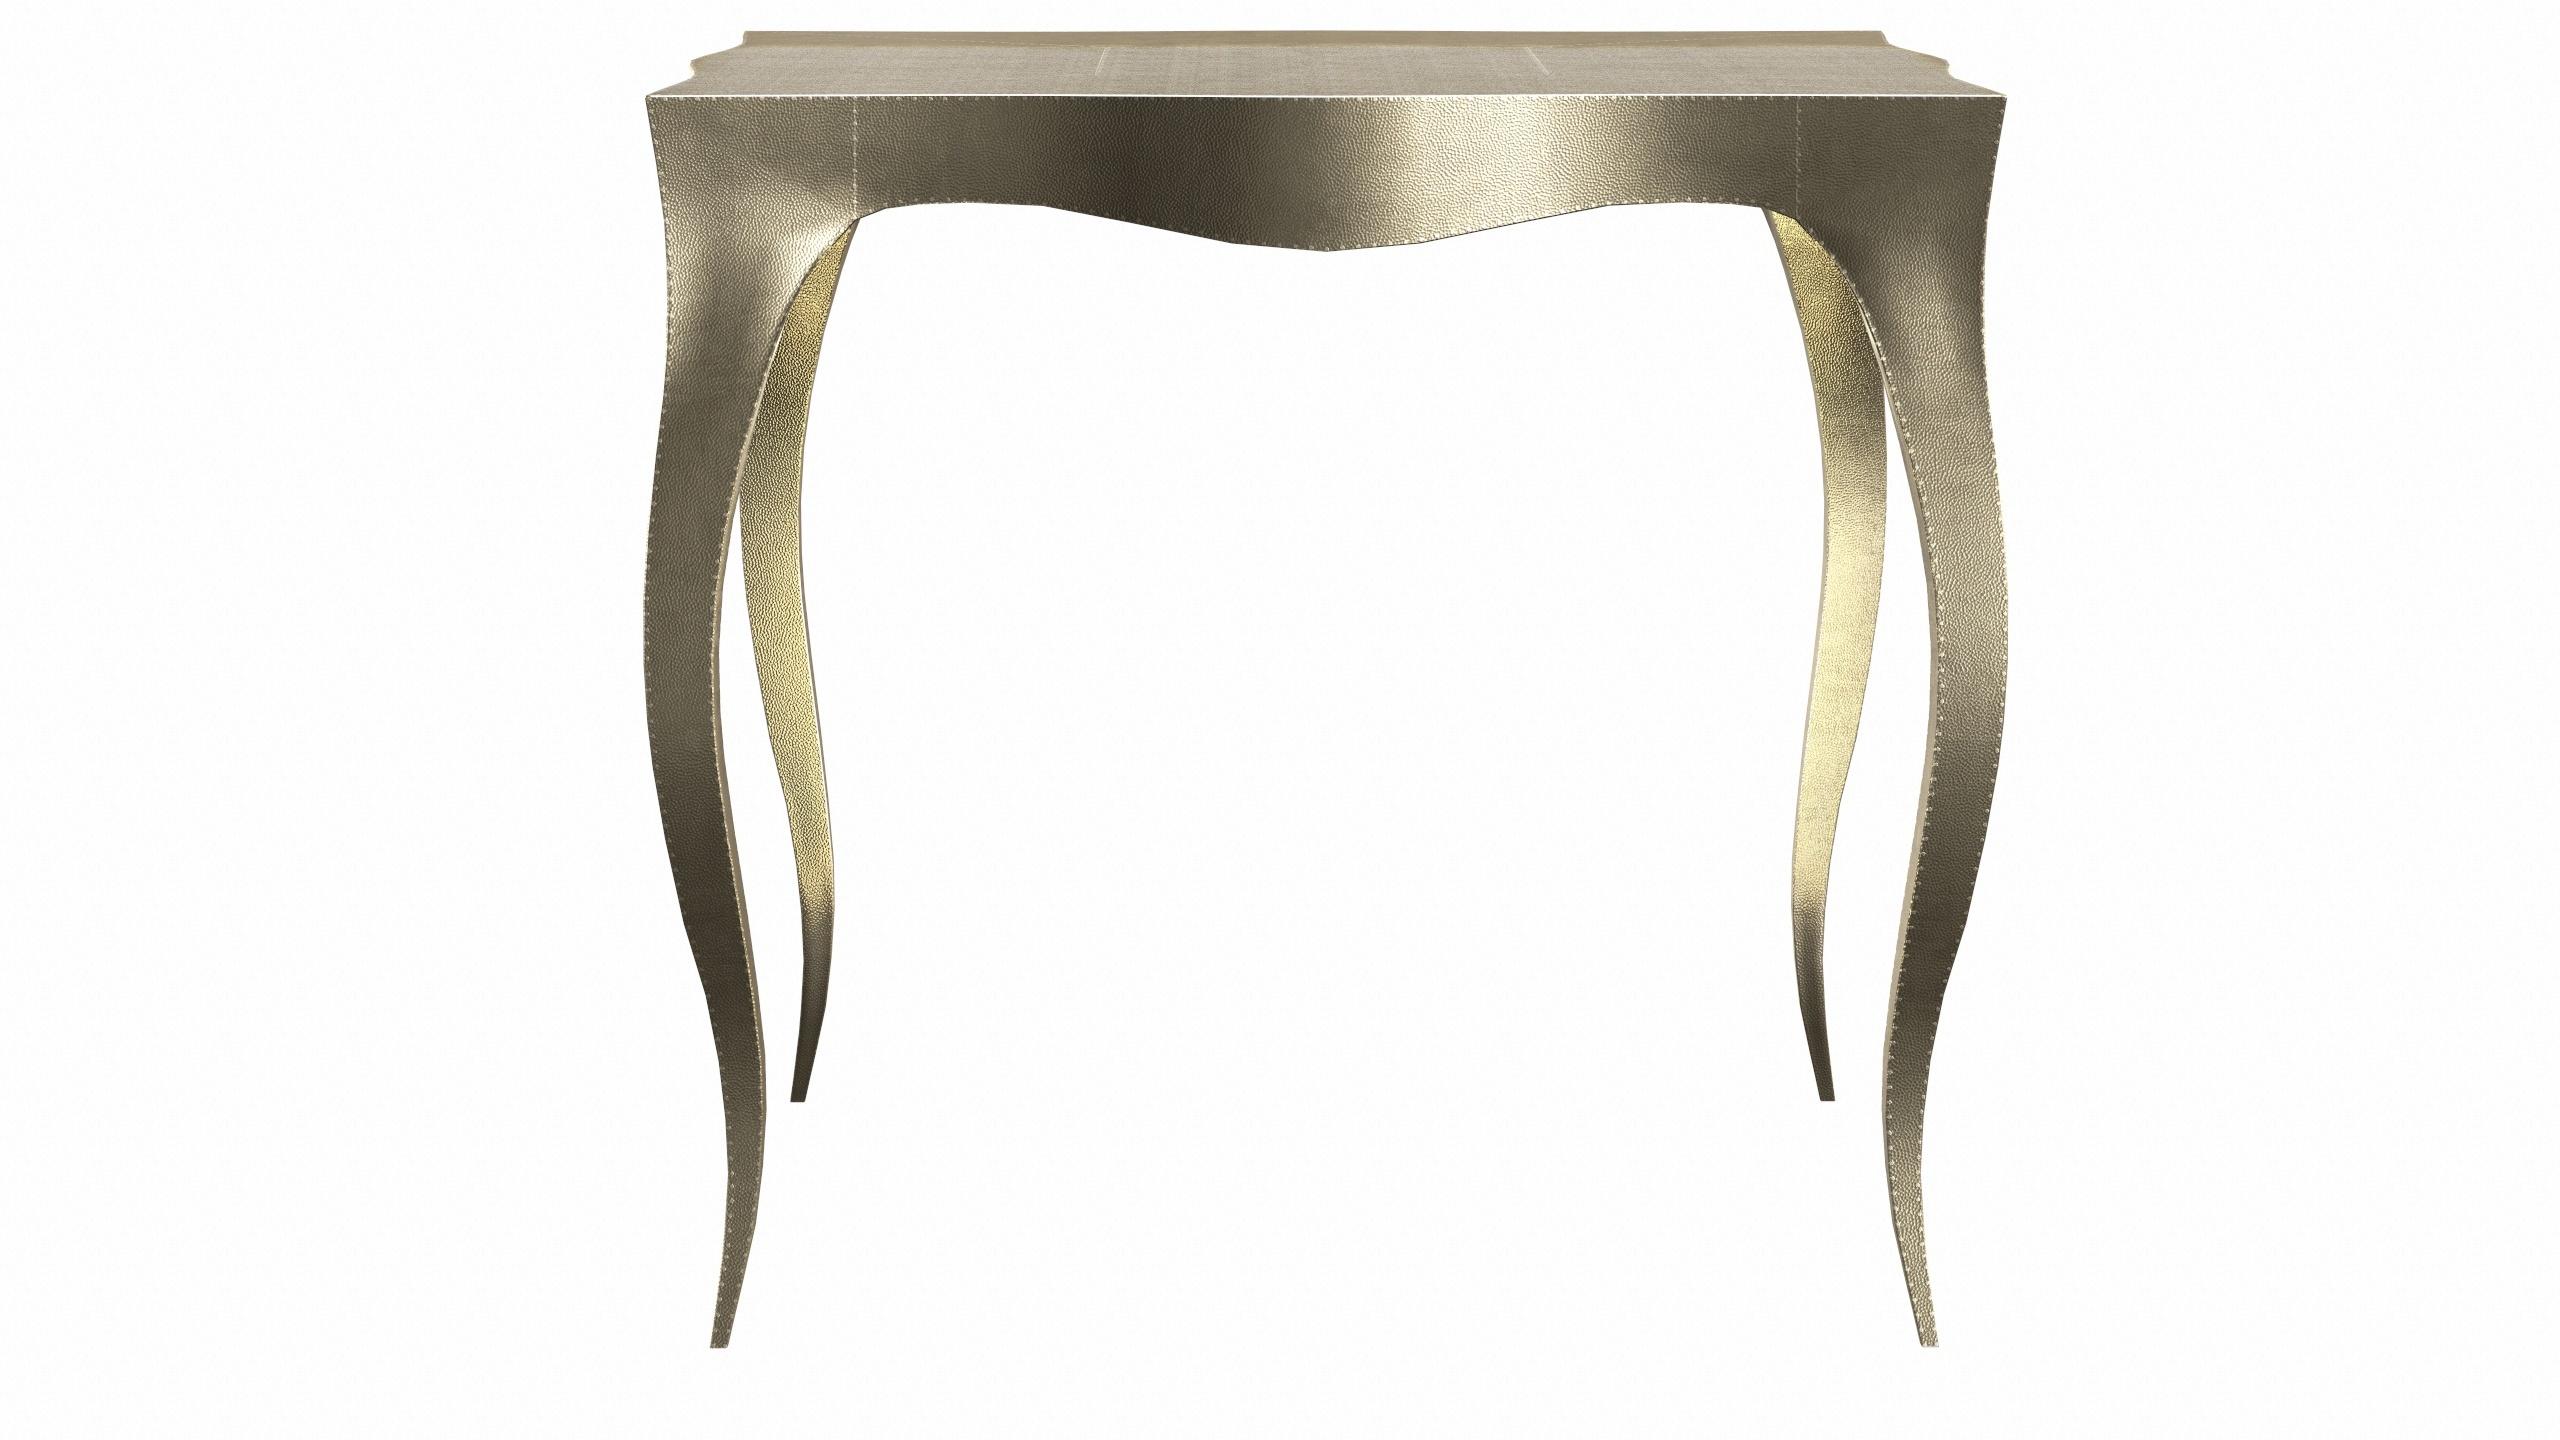 Louise Art Deco Coffee and Cocktail Tables  Mid. Hammered Brass by Paul Mathieu  For Sale 1